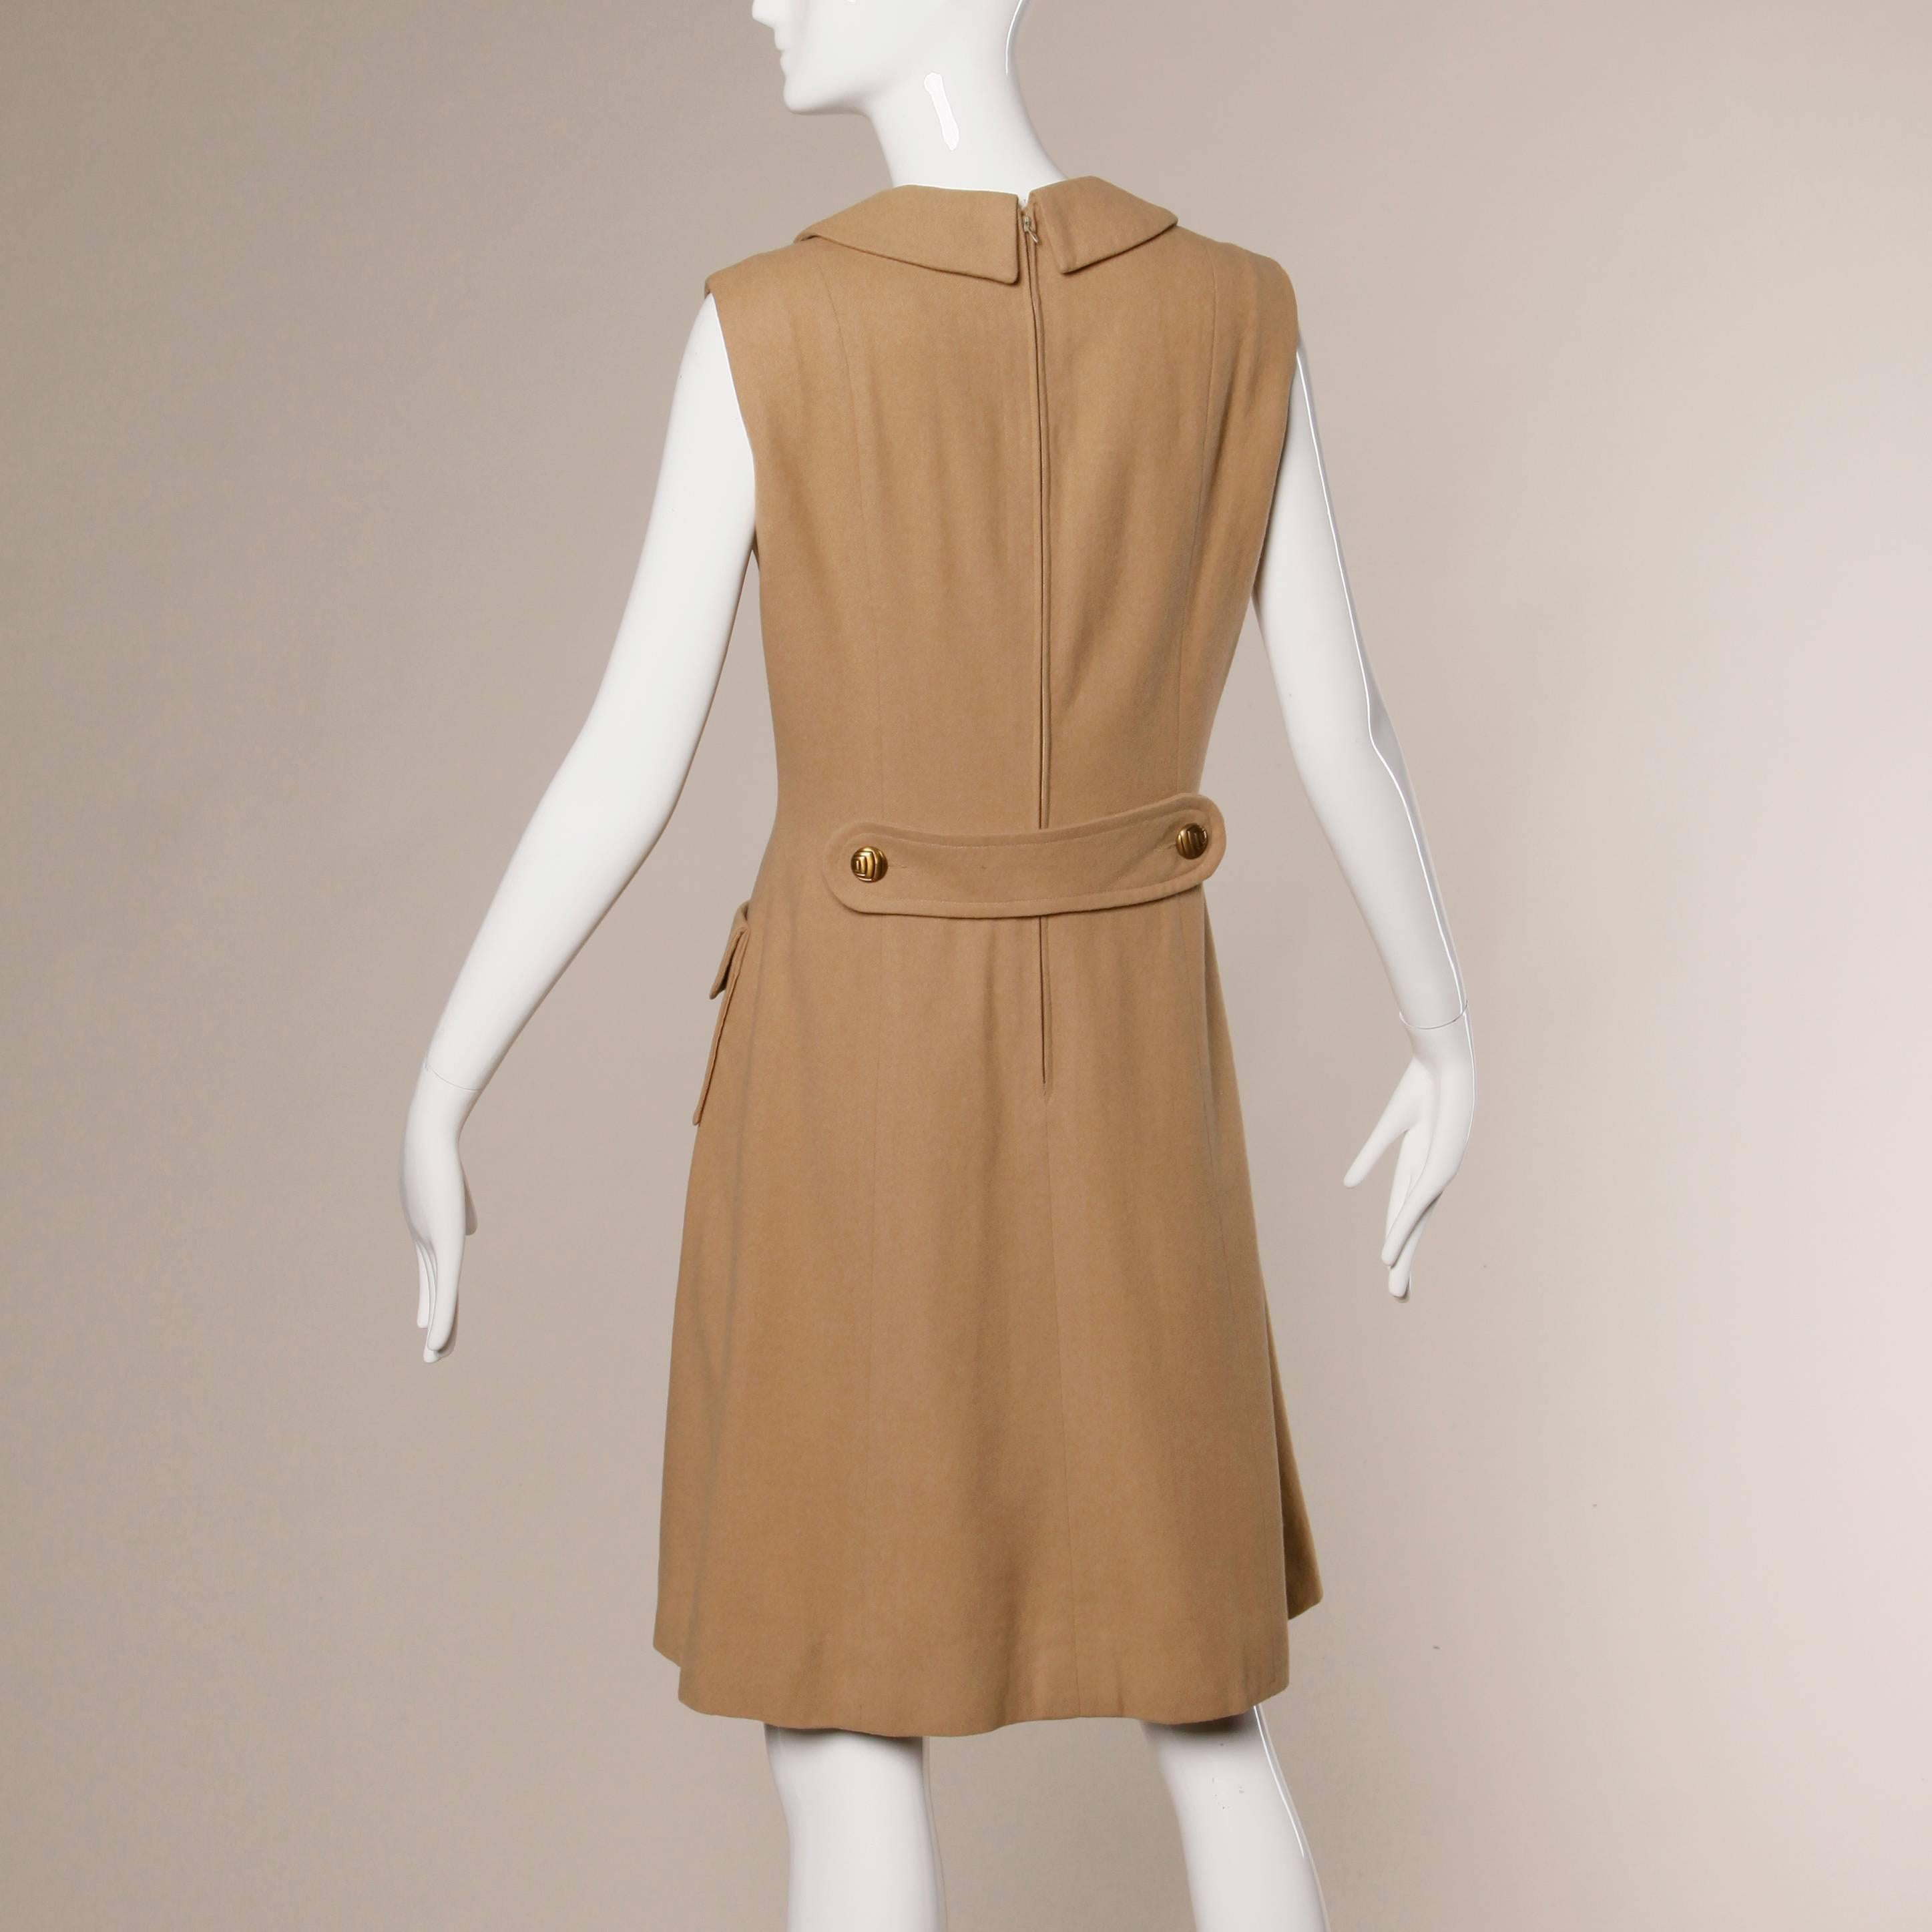 Women's 1960s Vintage Camel Wool Mod Dress with Peter Pan Collar and Kick Pleat